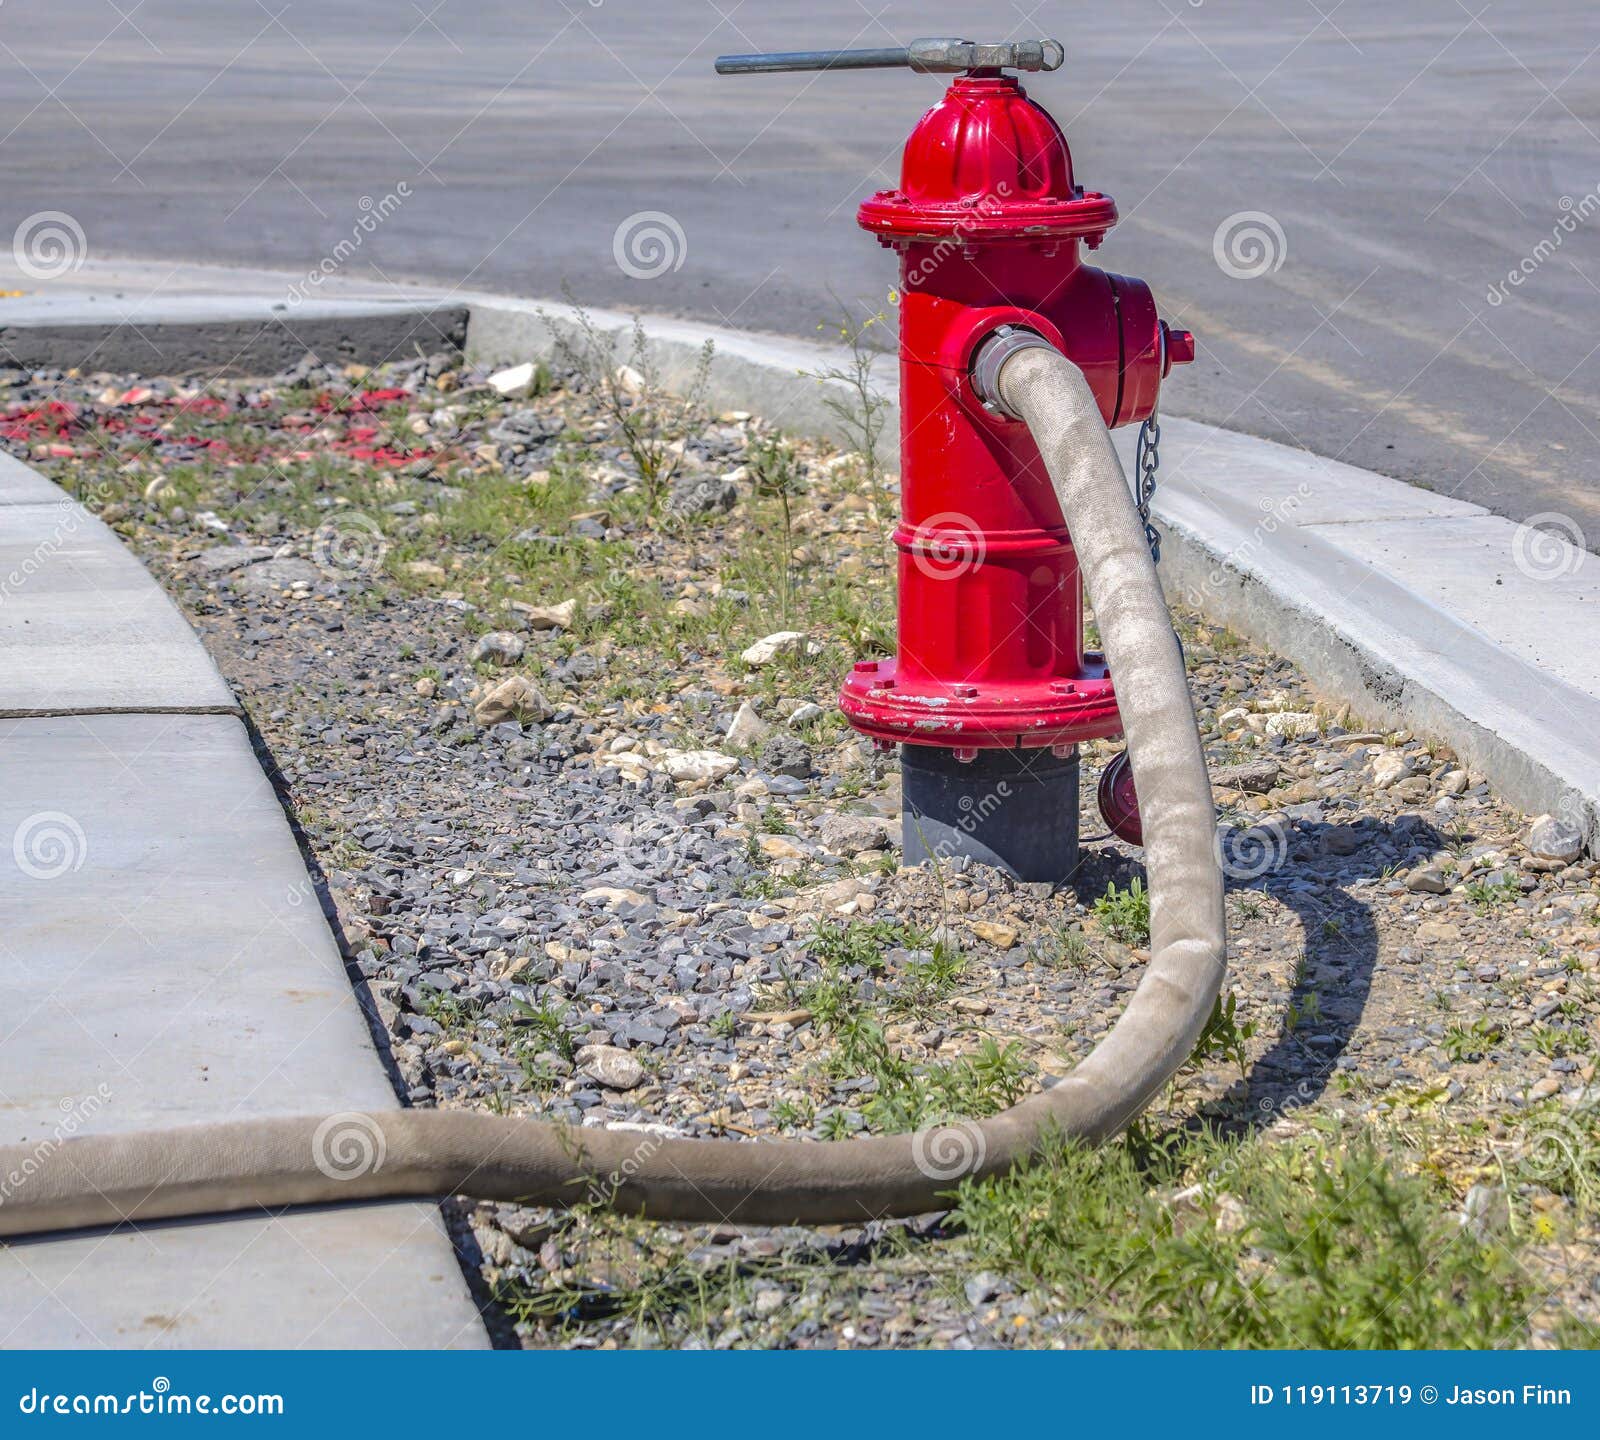 Fire Hose Conncted To Hydrant Stock Image - Image of firefighting,  industry: 119113719